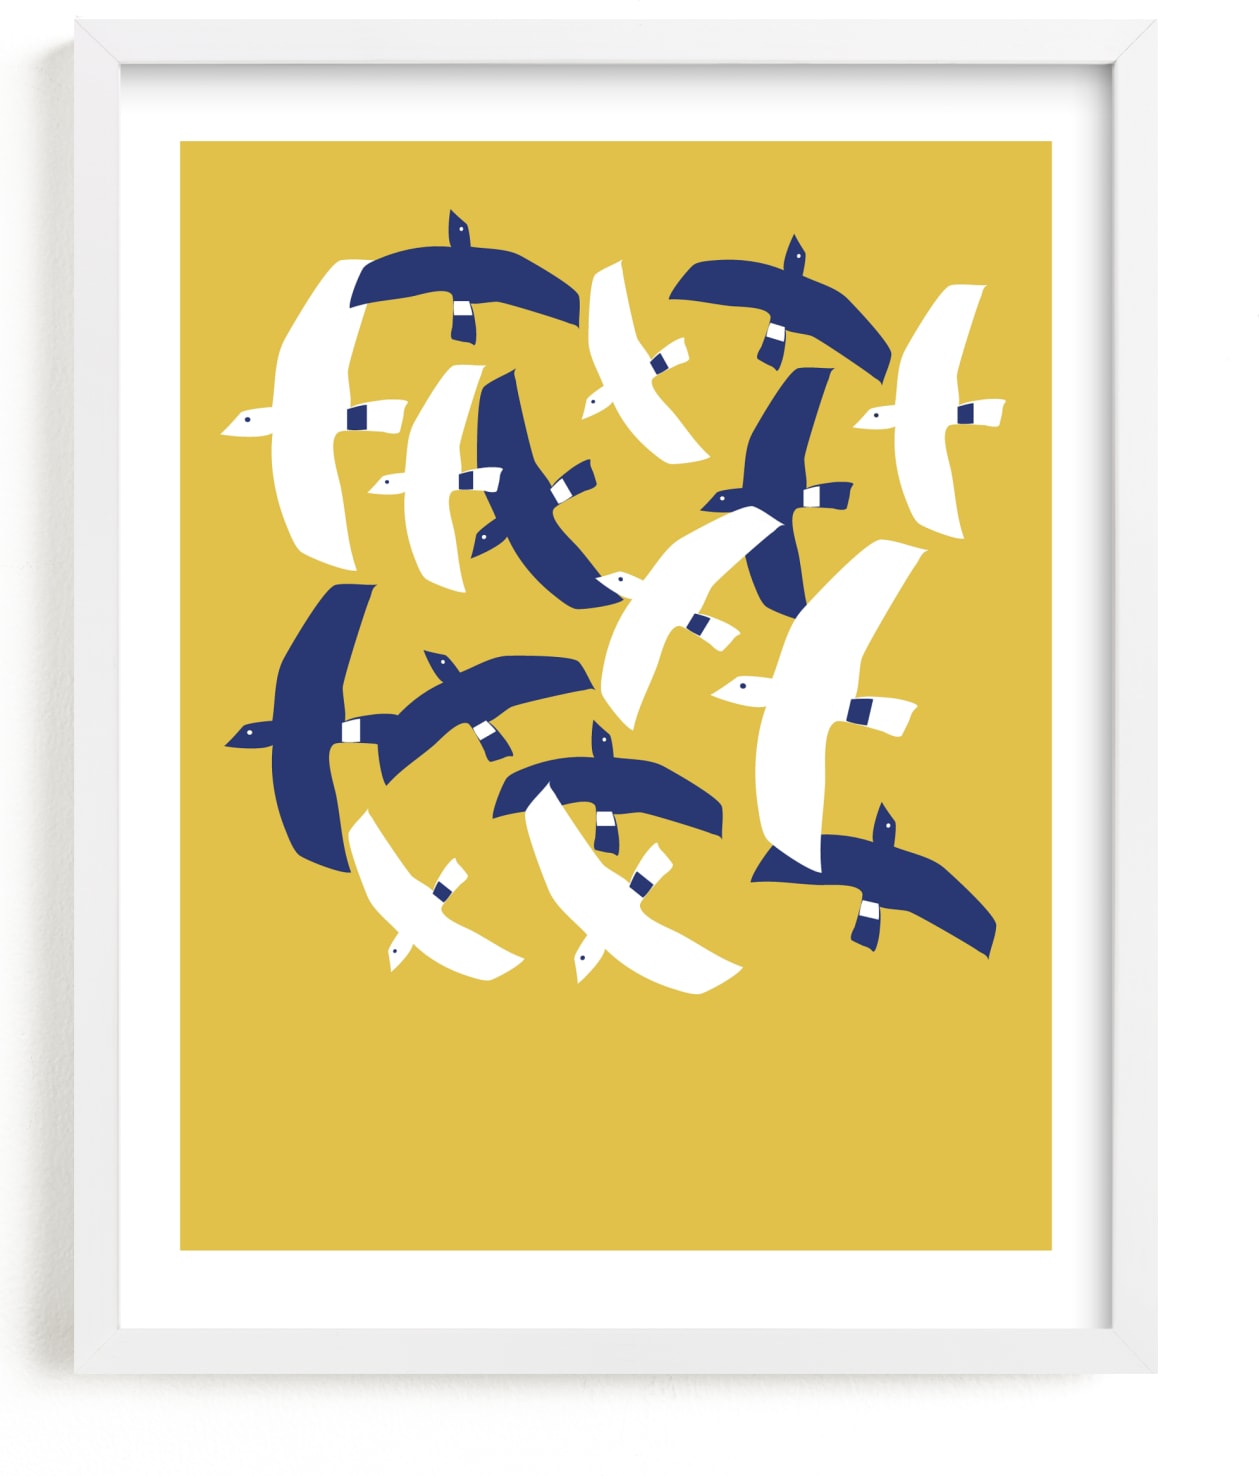 This is a yellow kids wall art by Jenna Skead called Fiep's Flock.